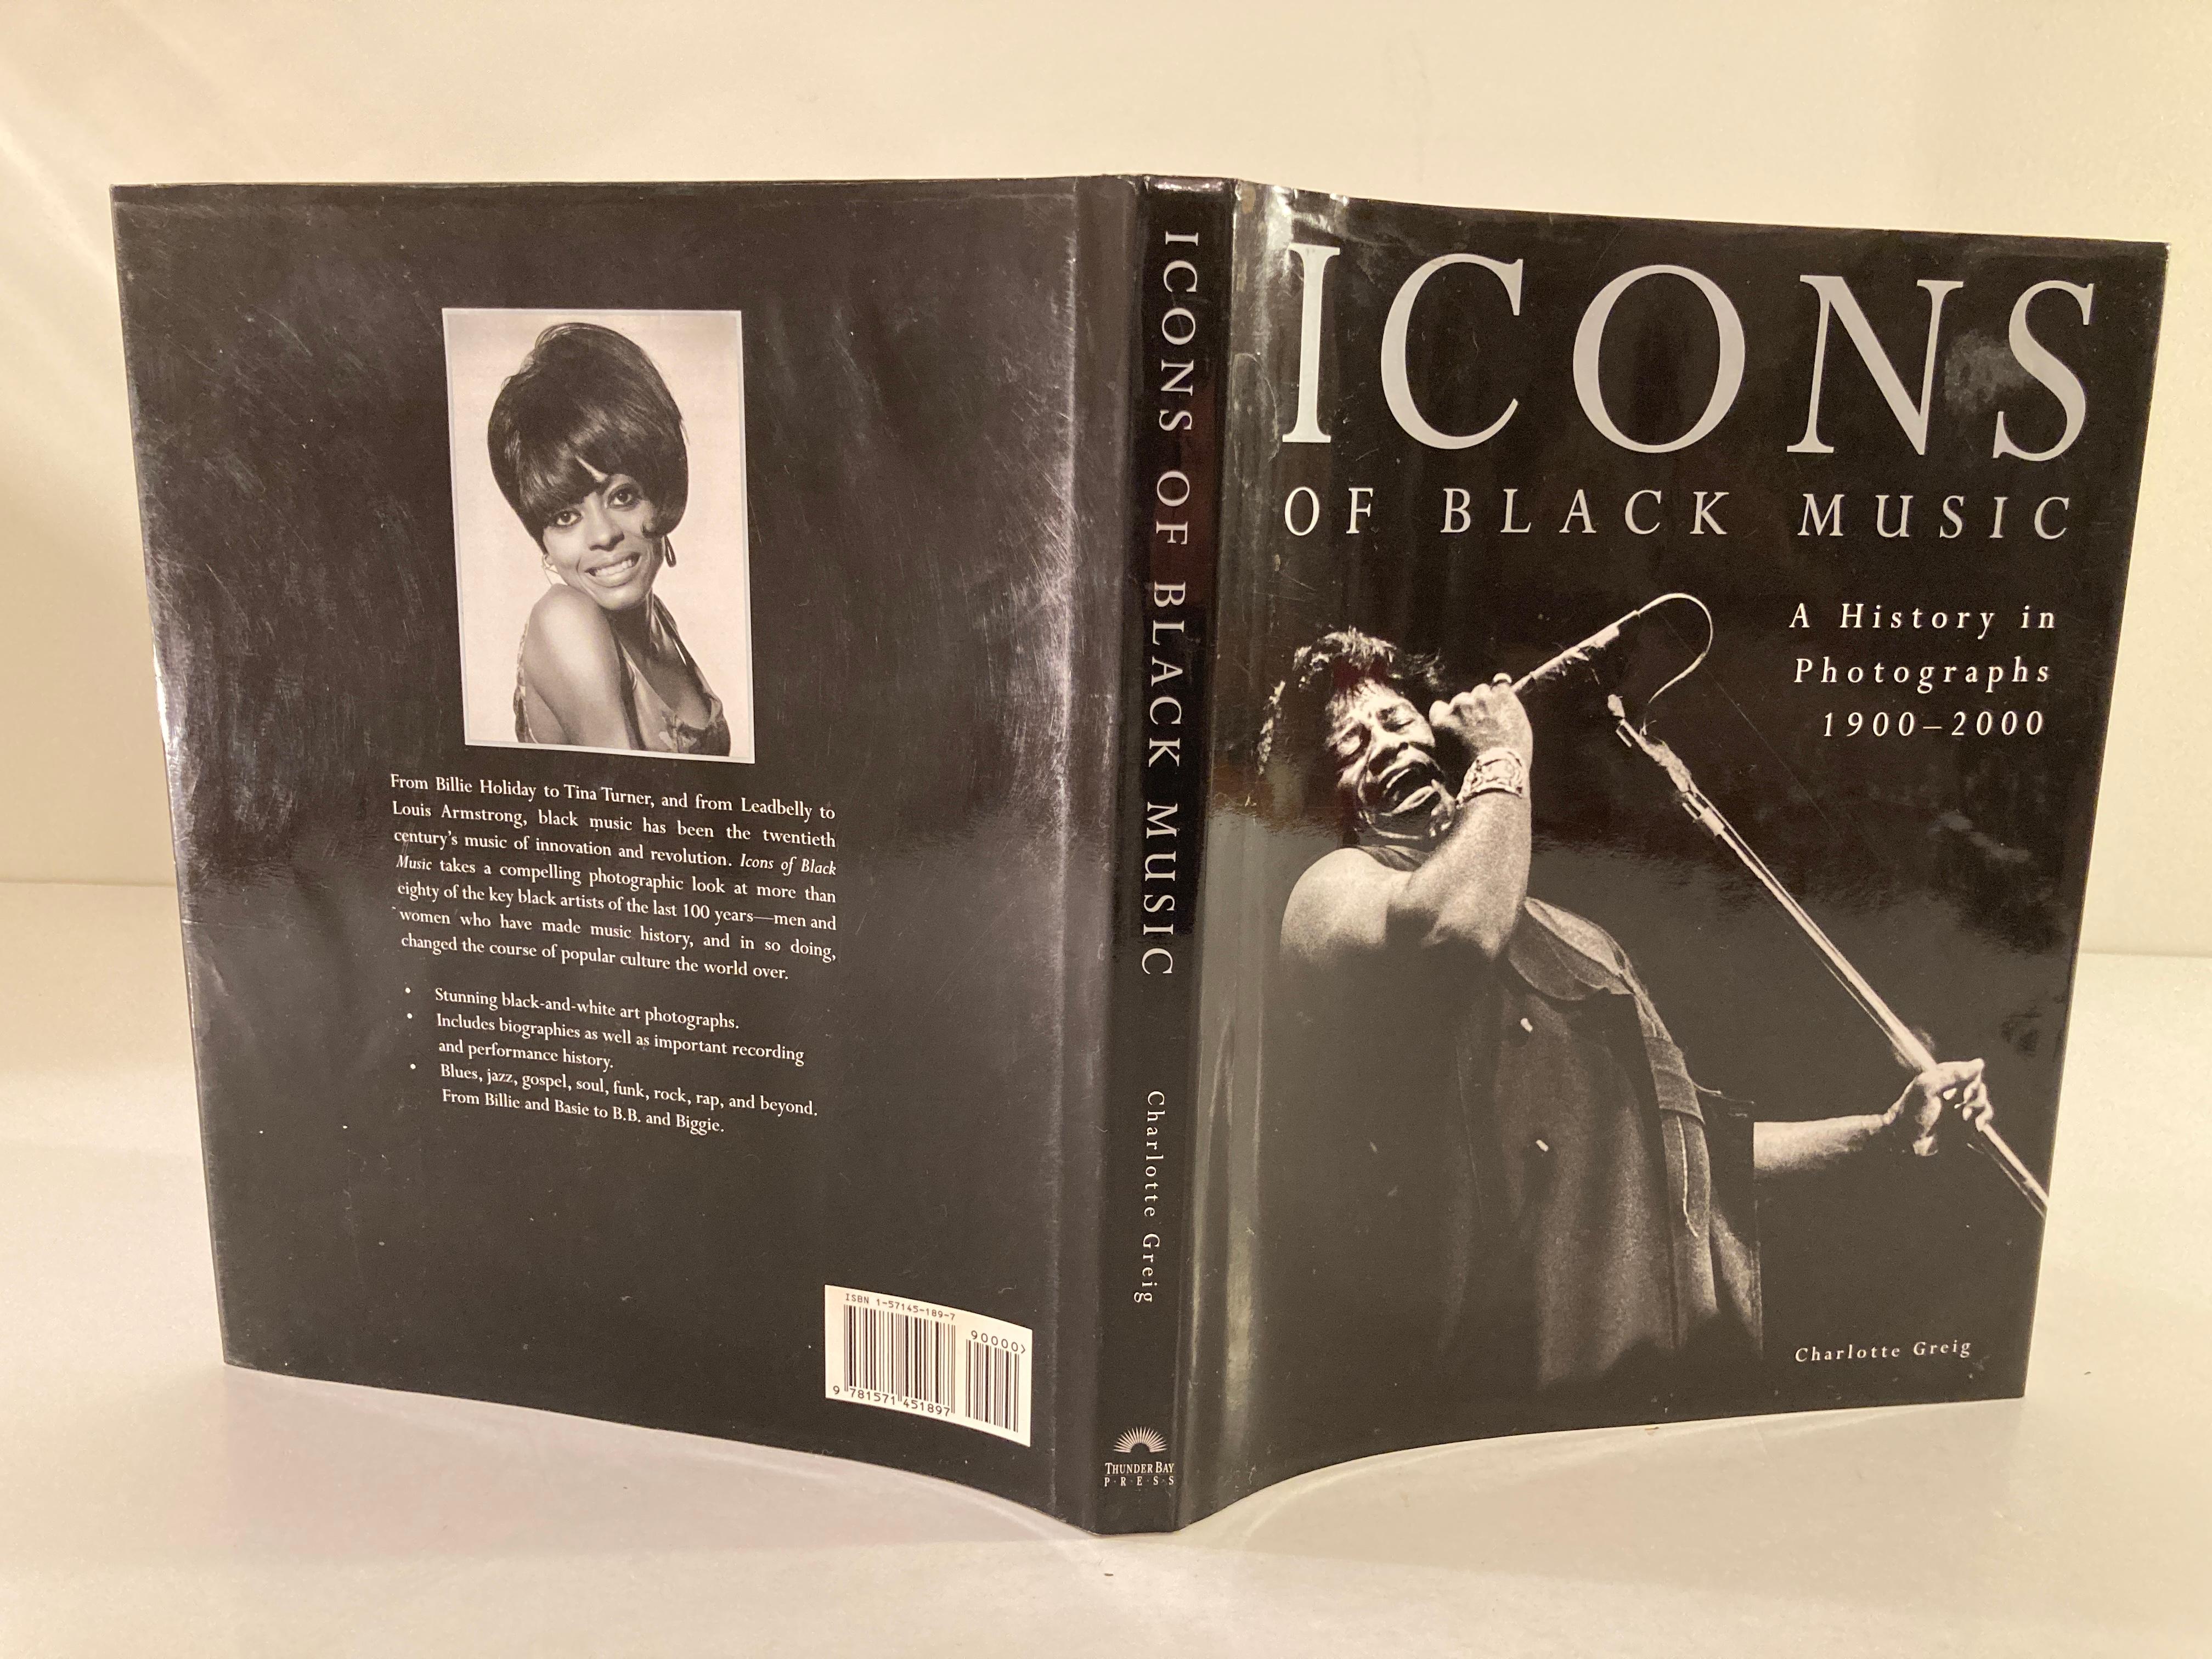 Icons Of Black Music A History In Photographs, 1900-2000 by Charlotte Greig 1